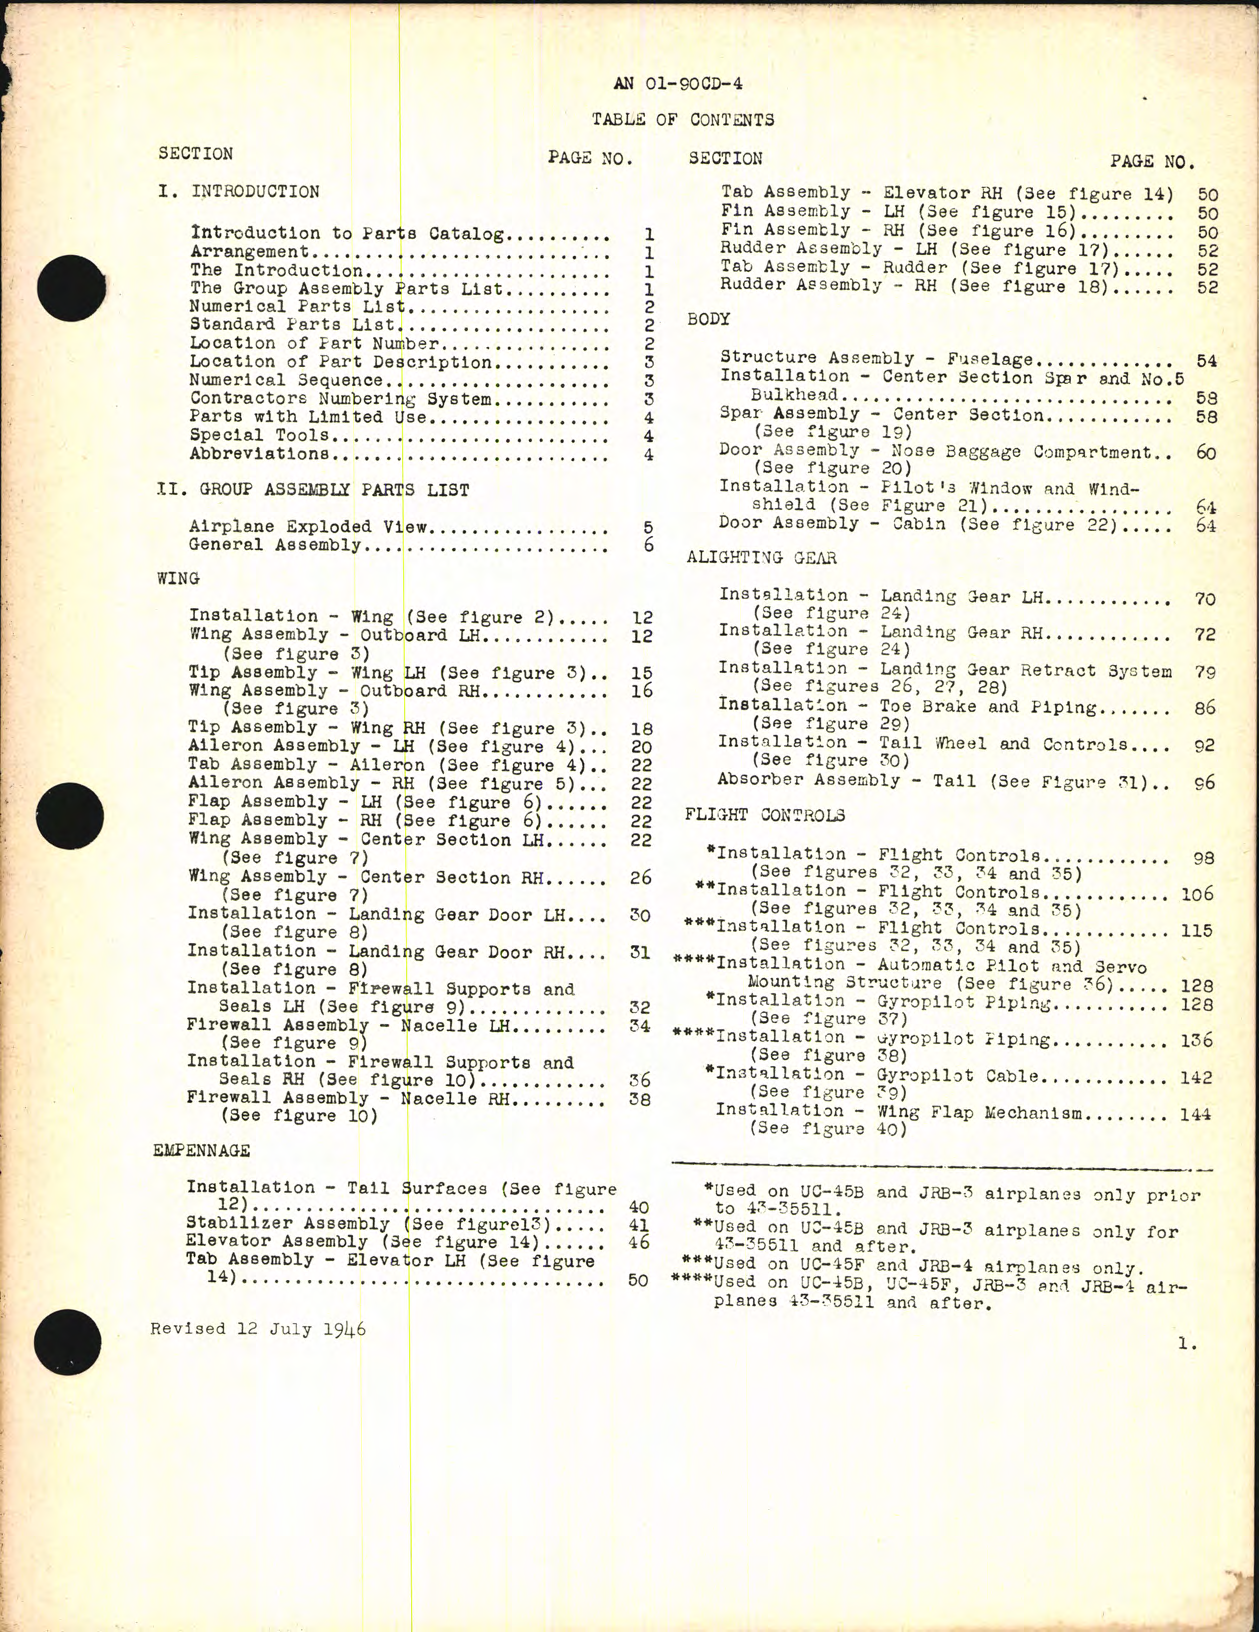 Sample page 5 from AirCorps Library document: Parts Catalog for C-45B, C-45F, JRB-3, and JRB-4